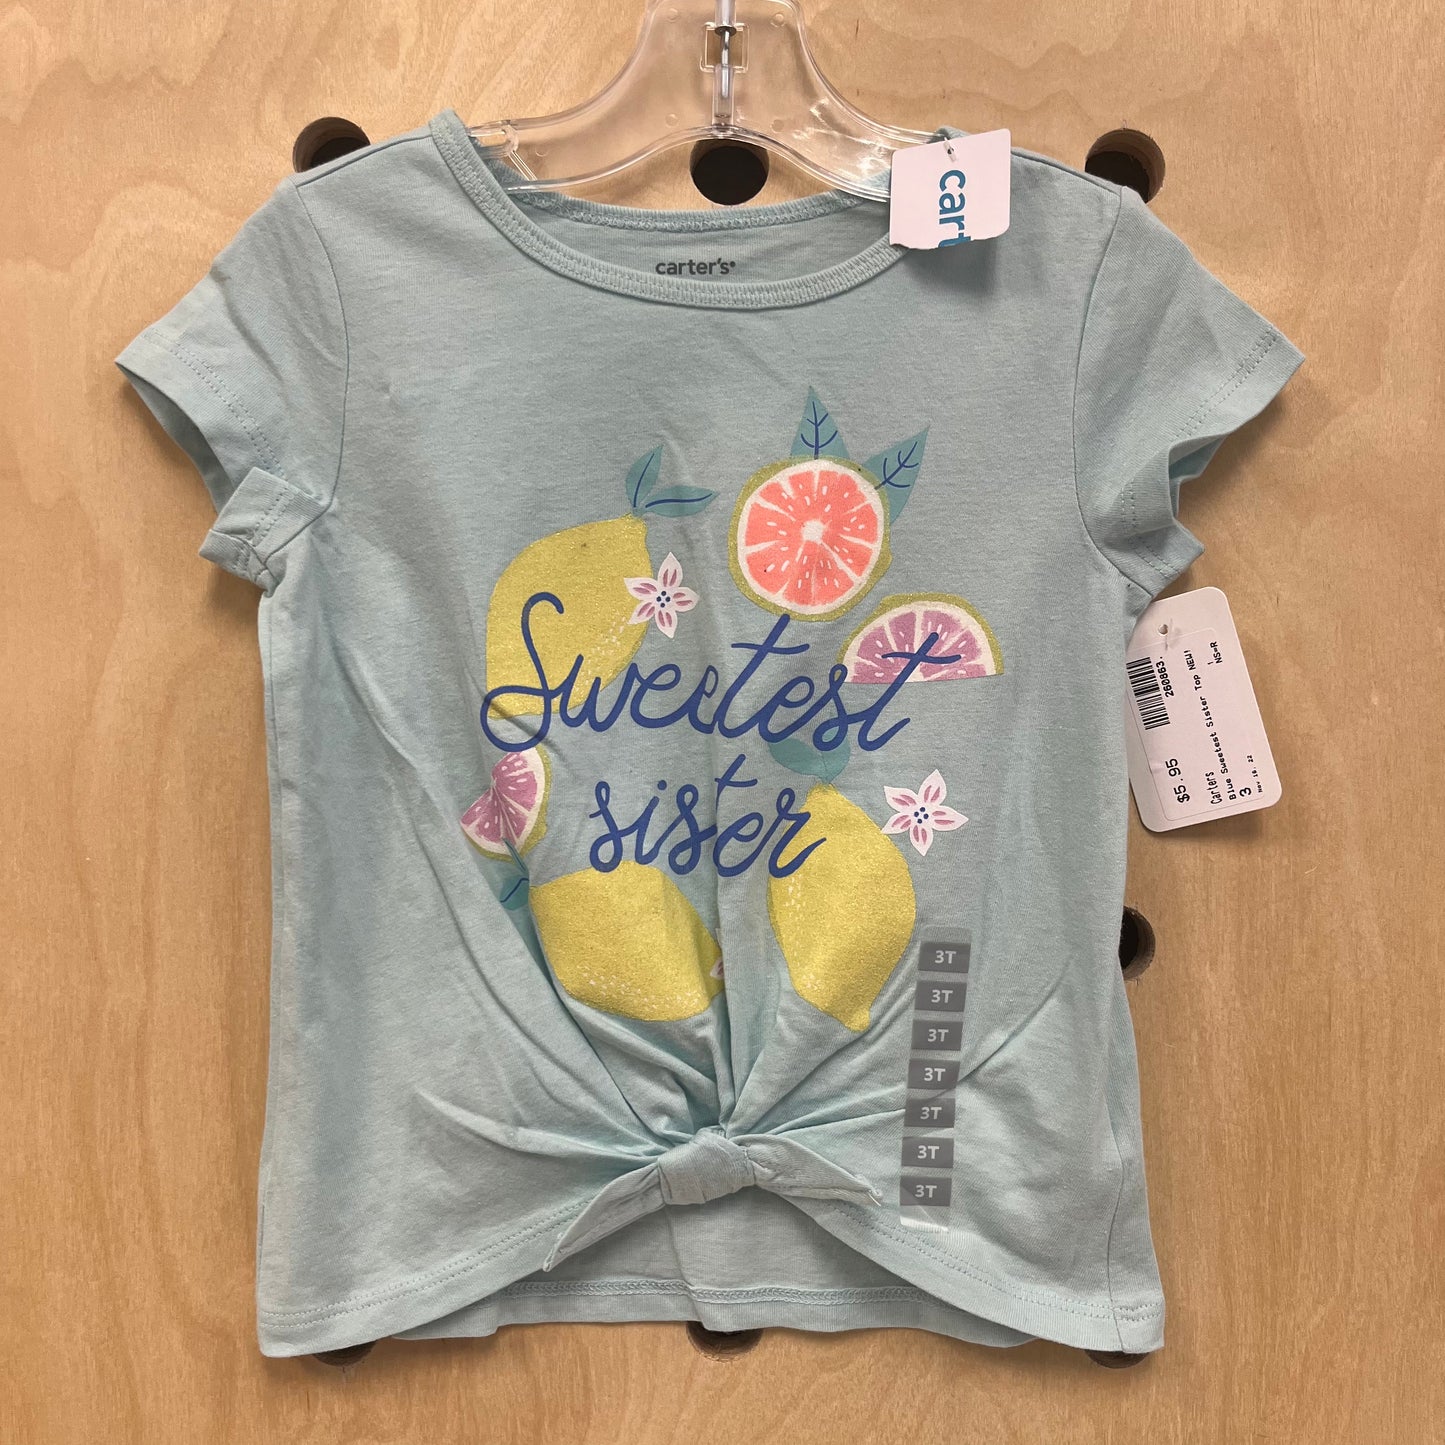 Blue Sweetest Sister Top NEW!